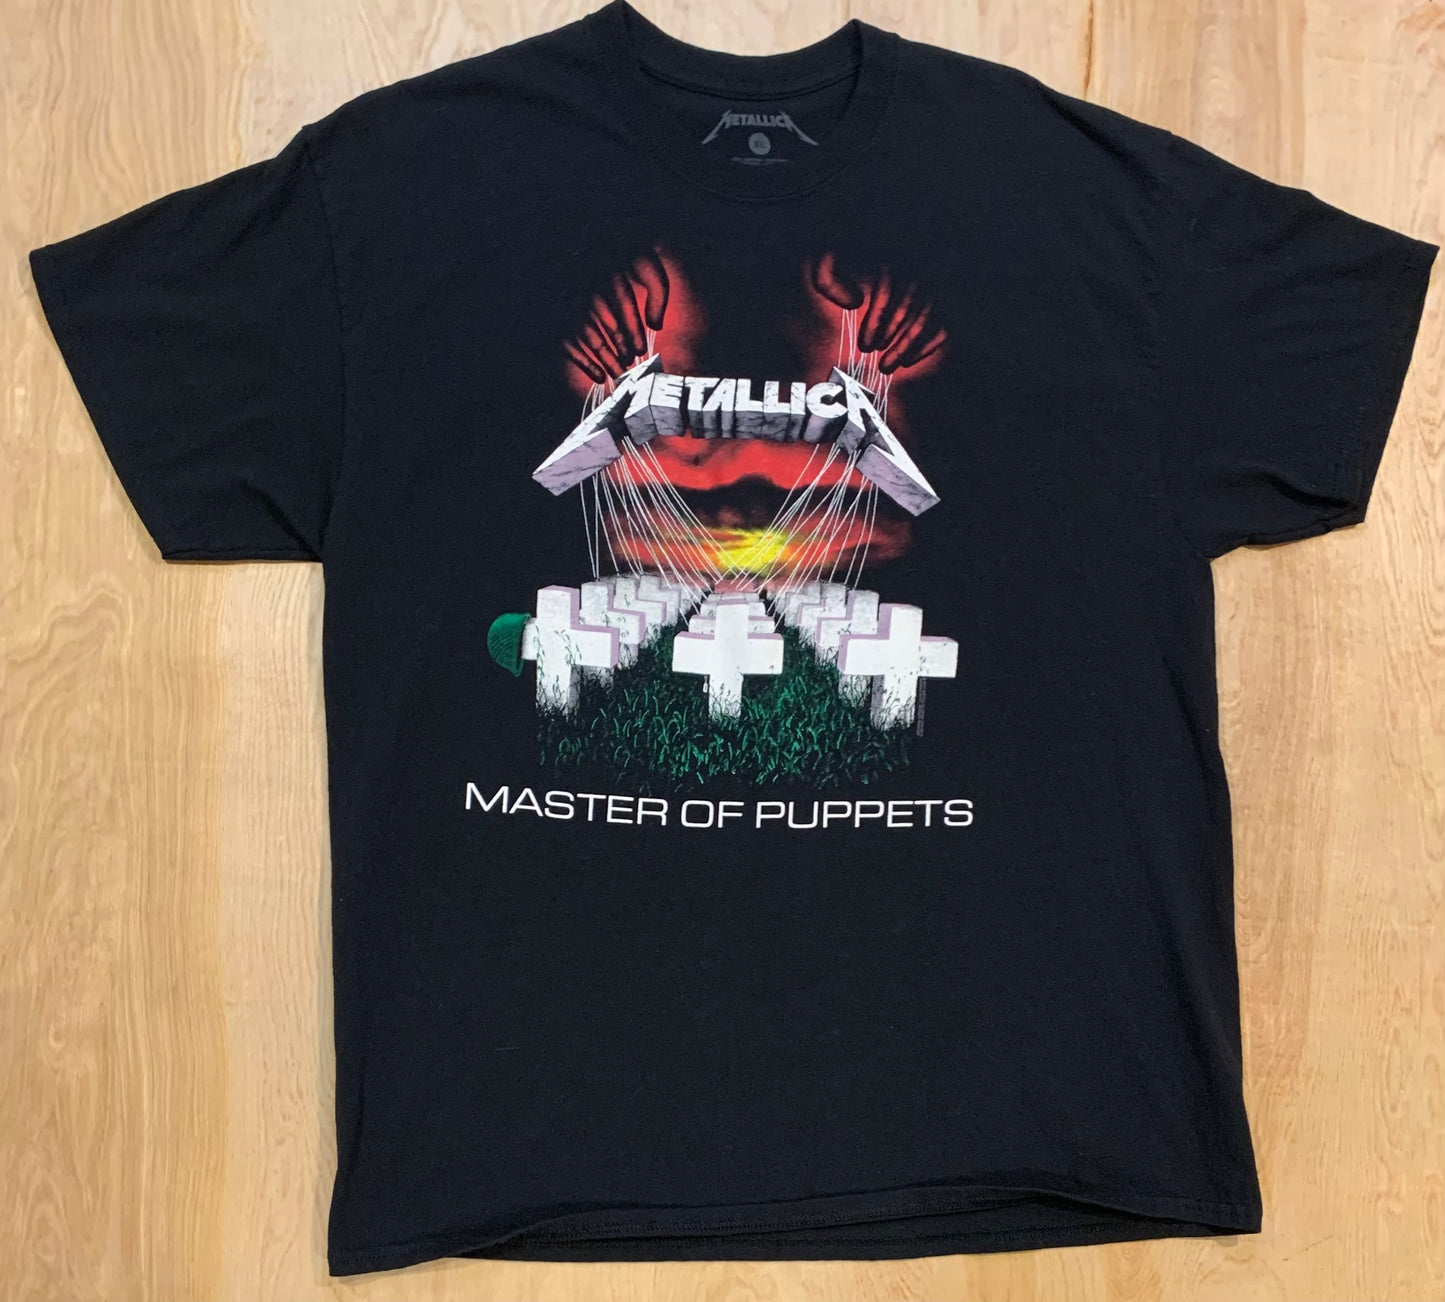 "Master Of Puppets" Metallica Graphic T-shirt